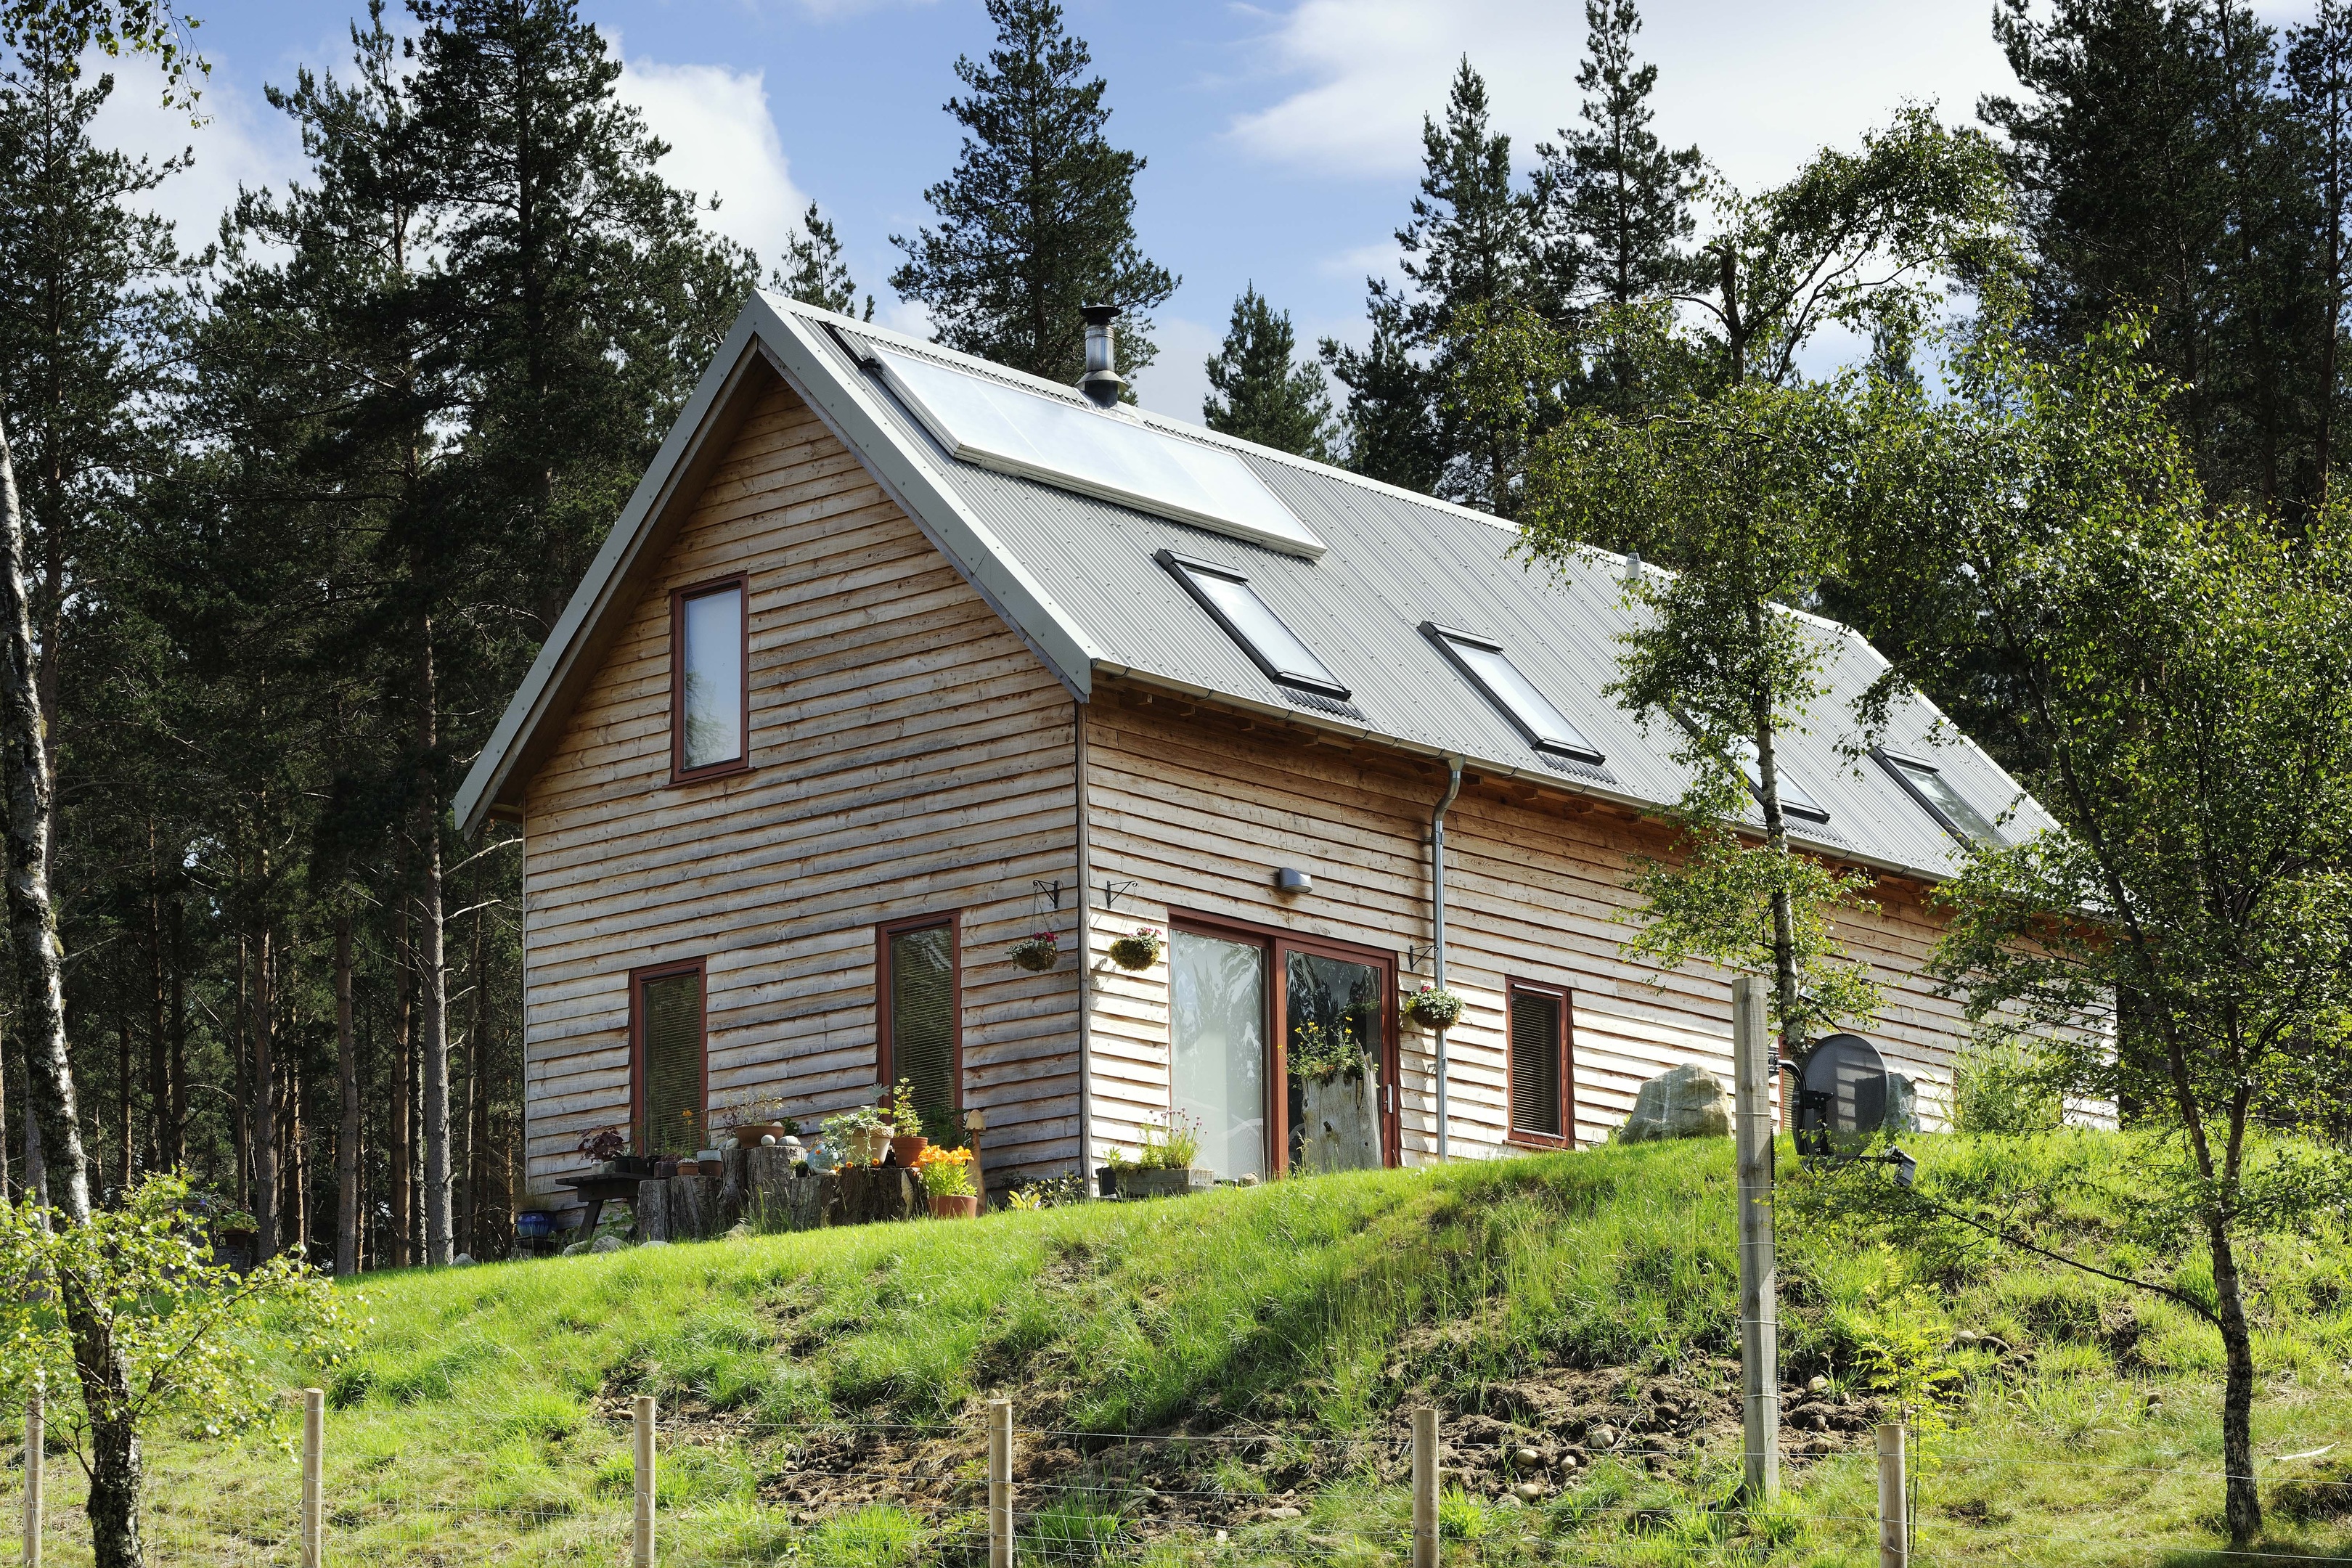 Loans of up to £175,000 are now available to help people build their own homes in the Highlands.